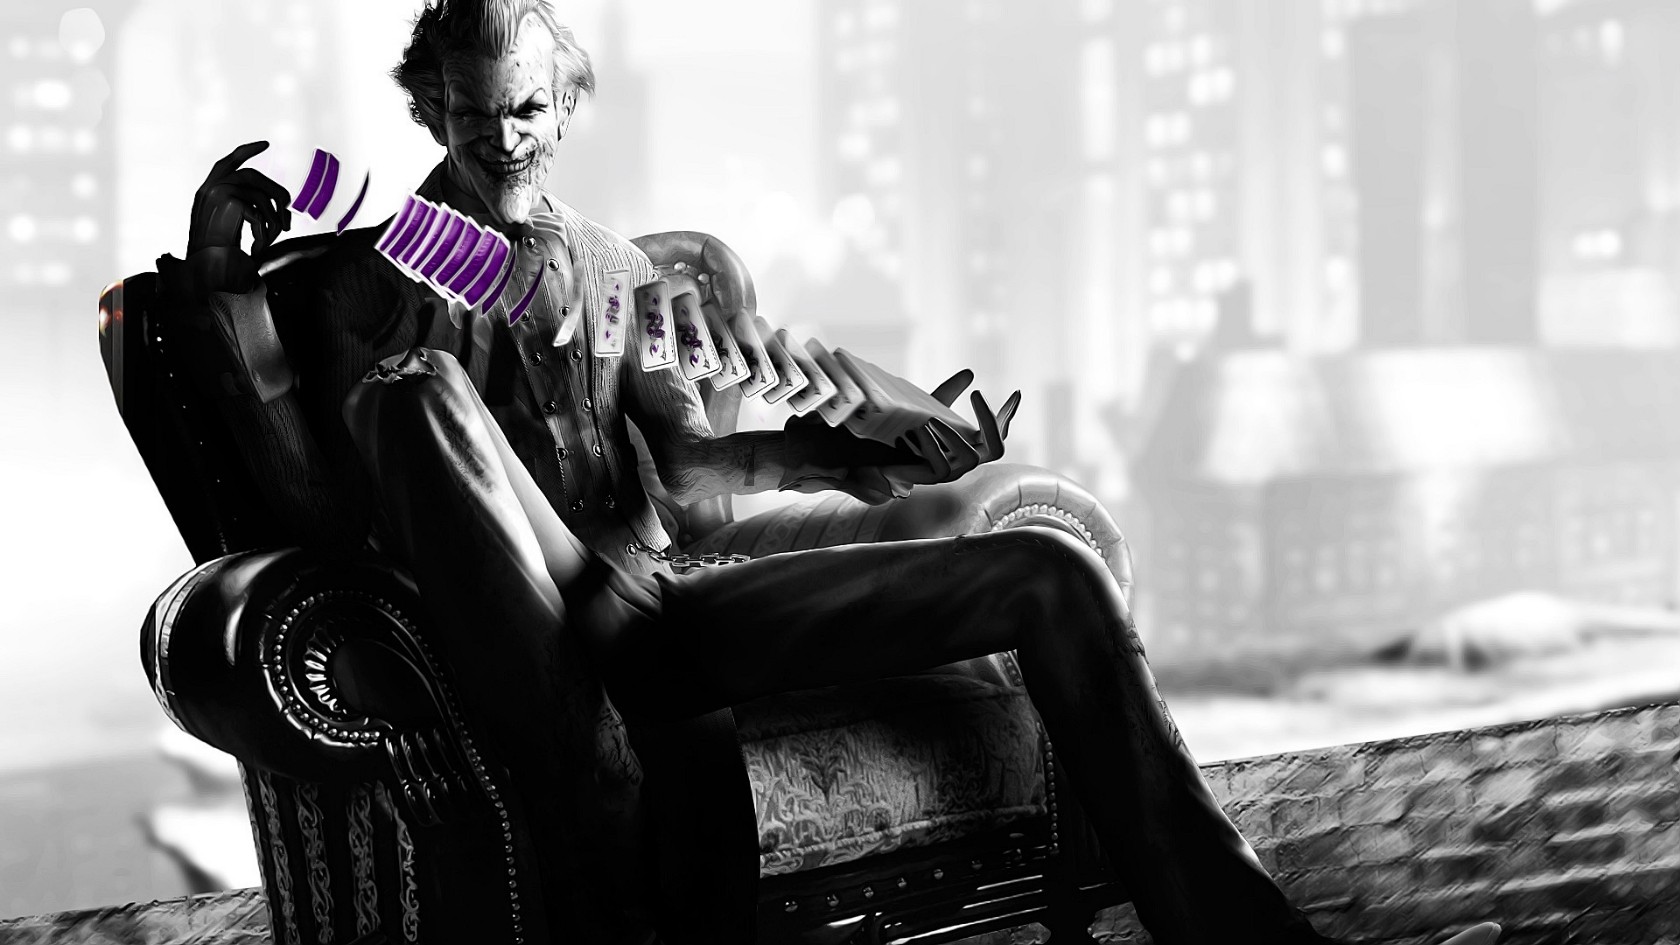 Joker, Couch, Armchairs, Cards, Video games, Movies, Batman, Selective coloring Wallpaper